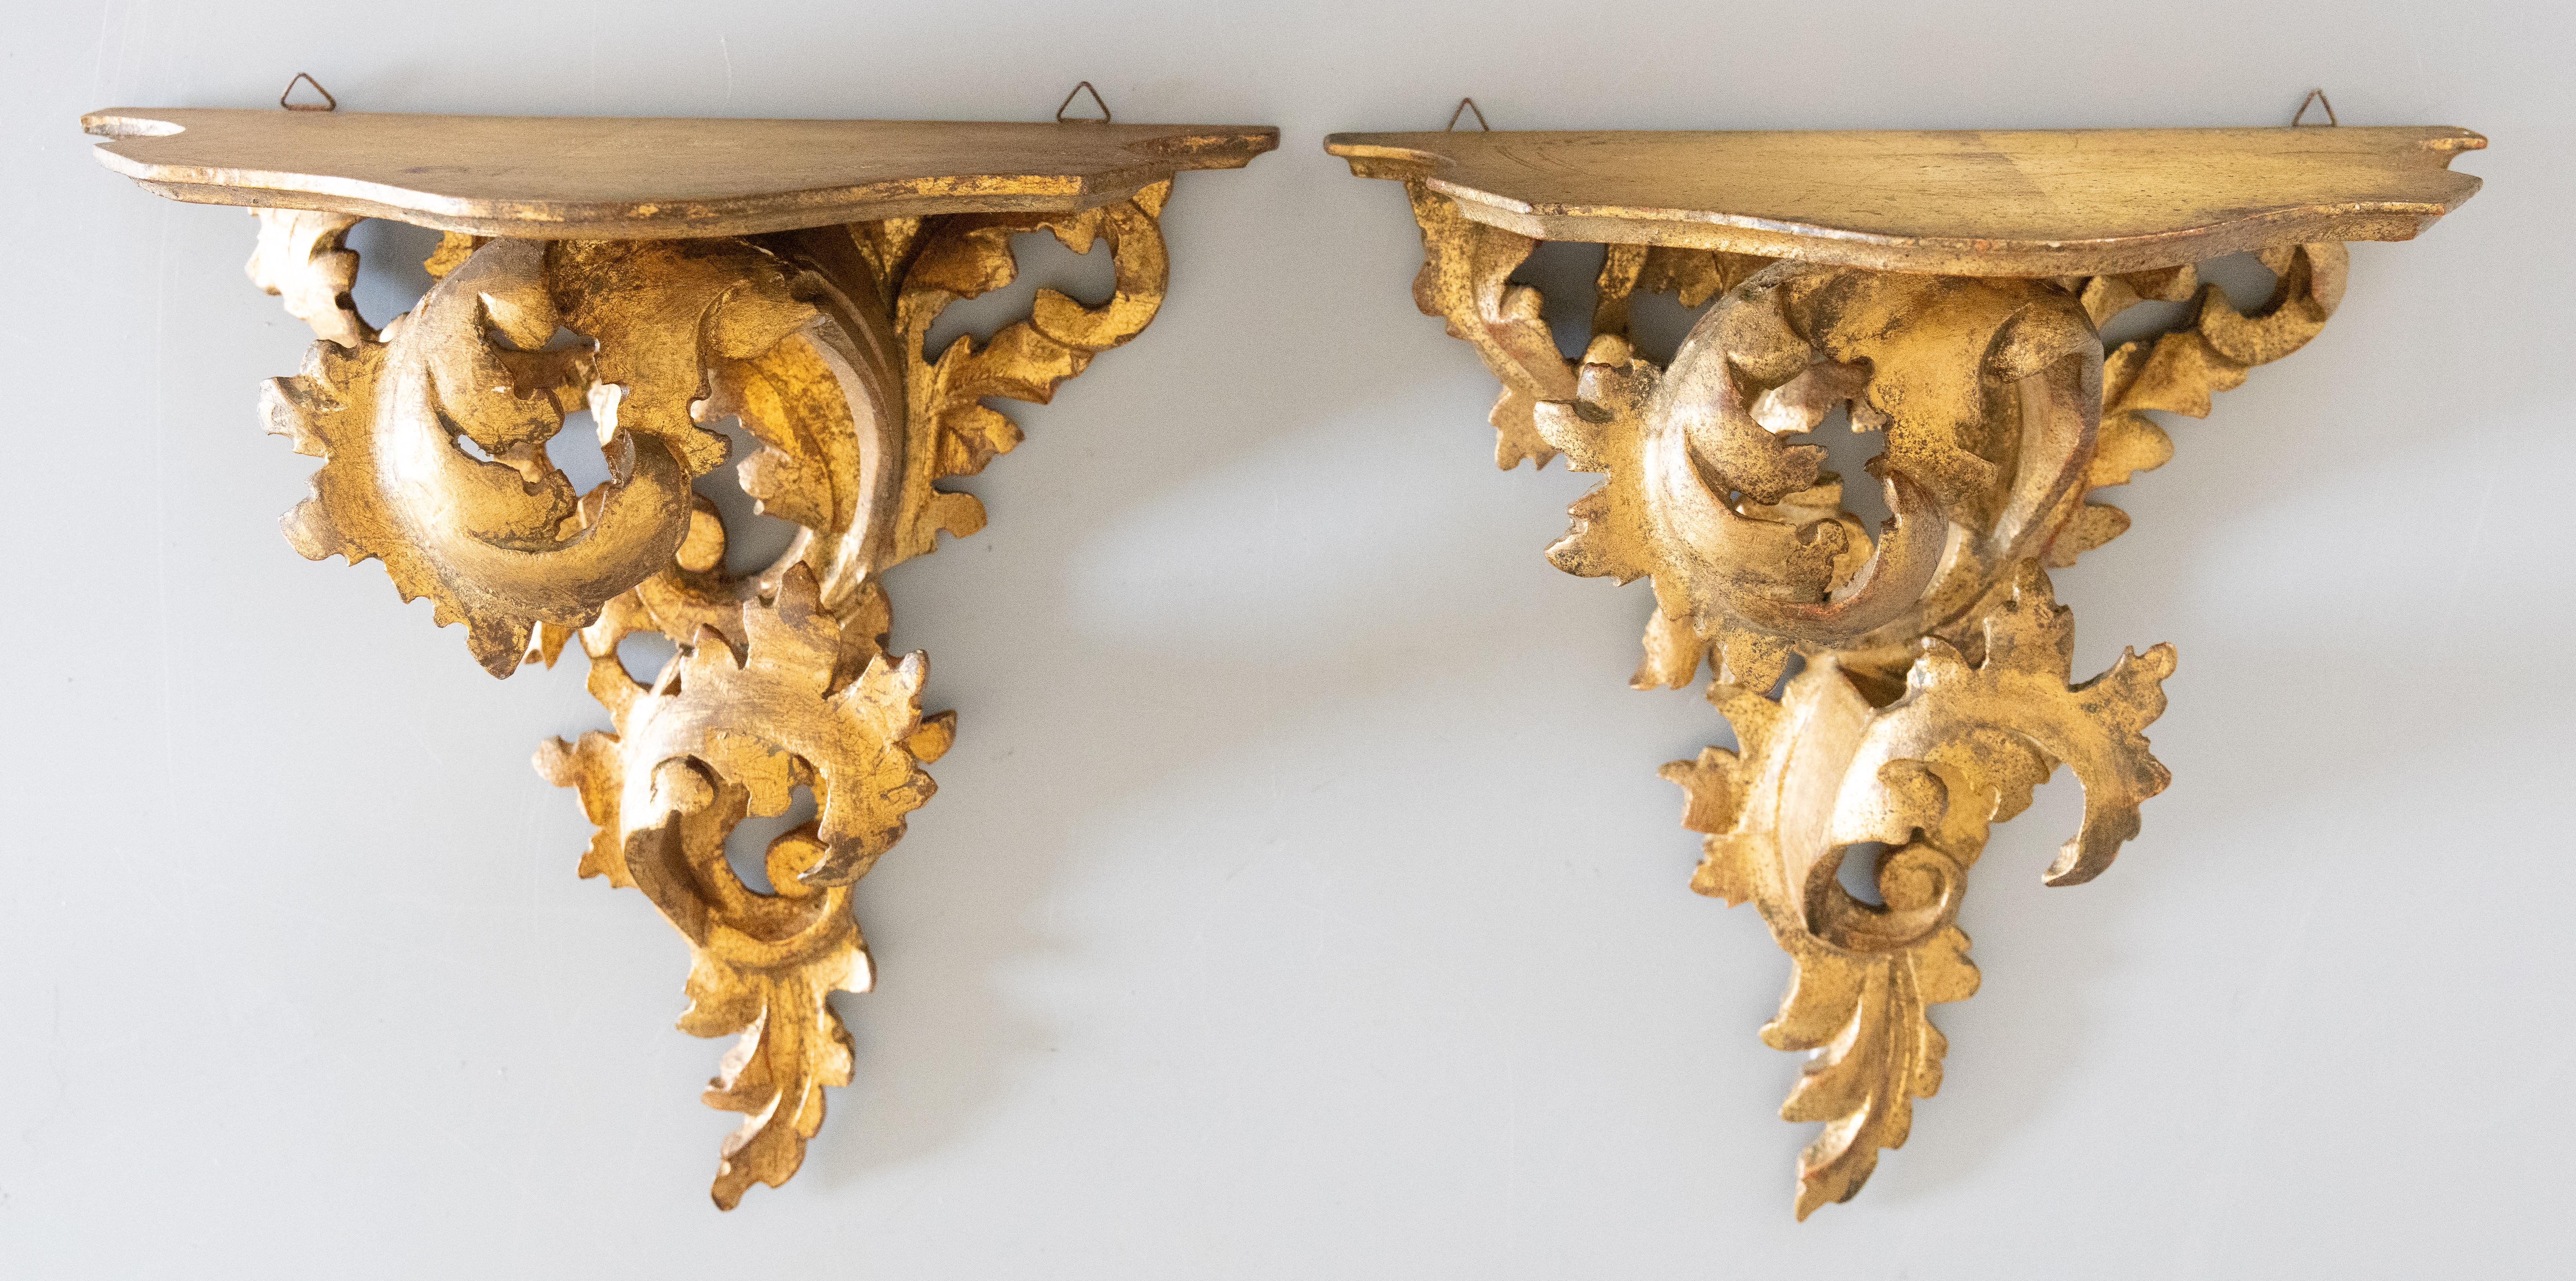 A lovely pair of Mid-Century Italian Florentine gilded wood wall brackets shelves. One bracket is stamped 